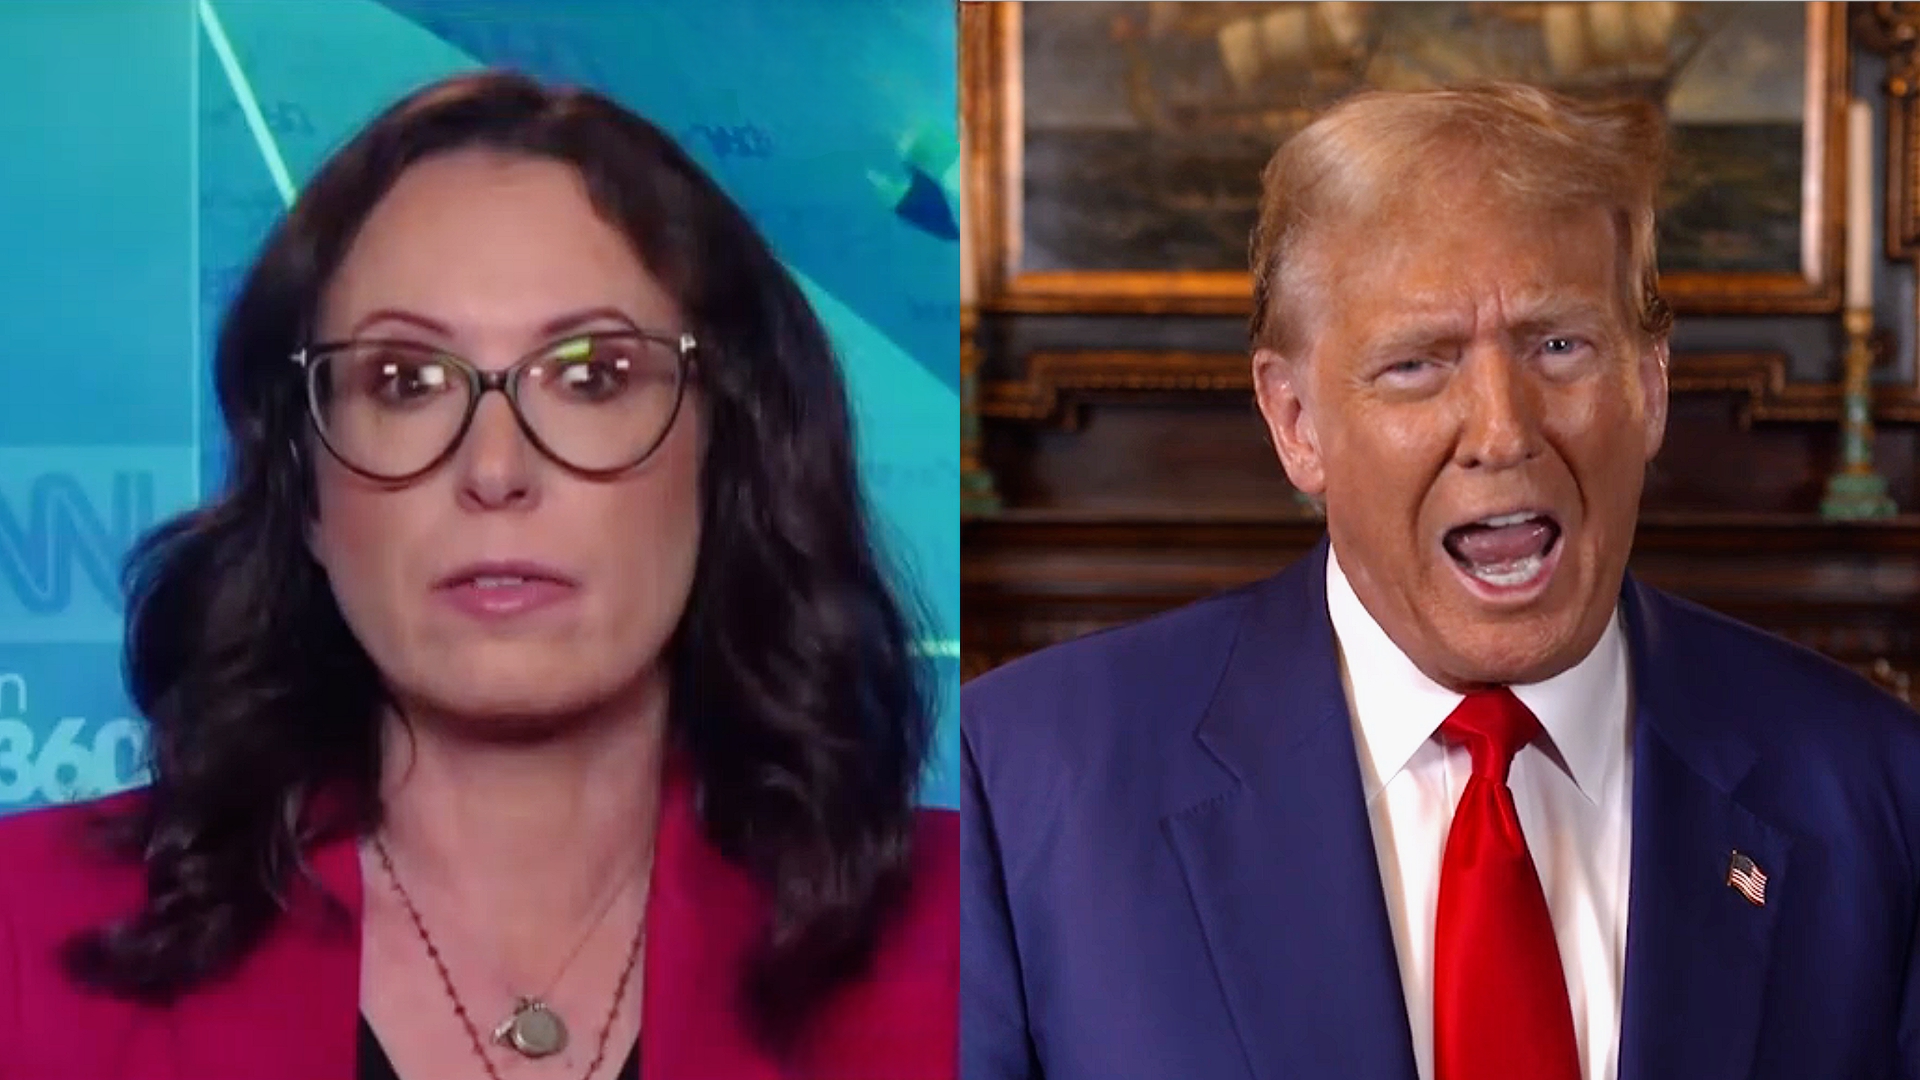 Trump ‘Glared’ At Maggie Haberman for ‘Several Seconds’ After She Reported He Fell Asleep In Court